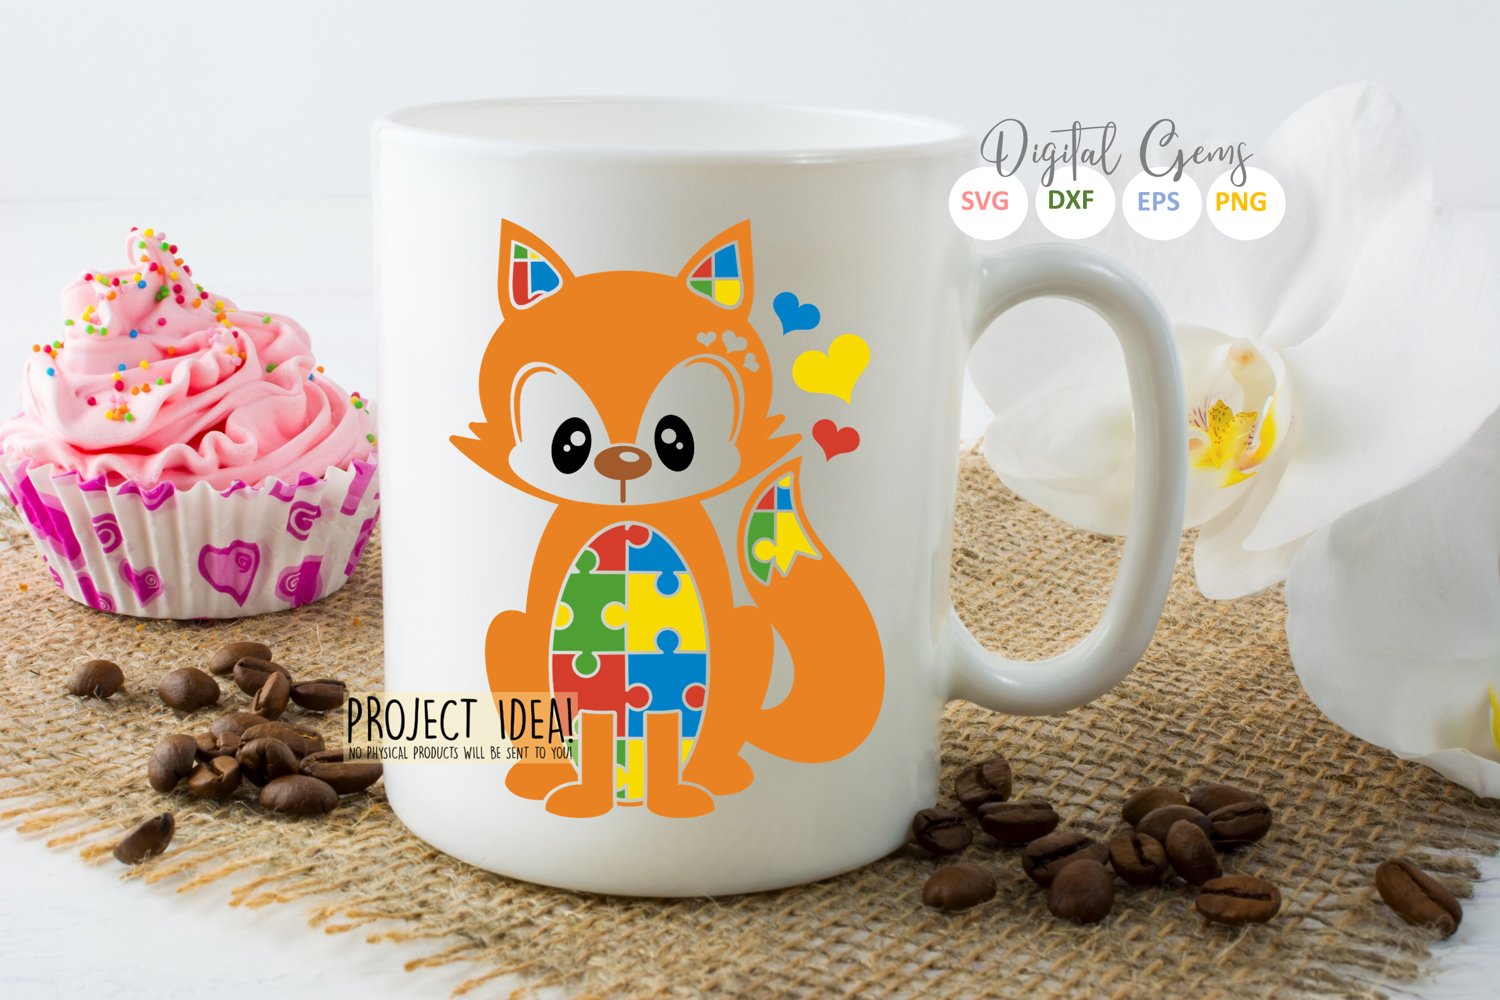 Beautiful fox illustration for a cup.